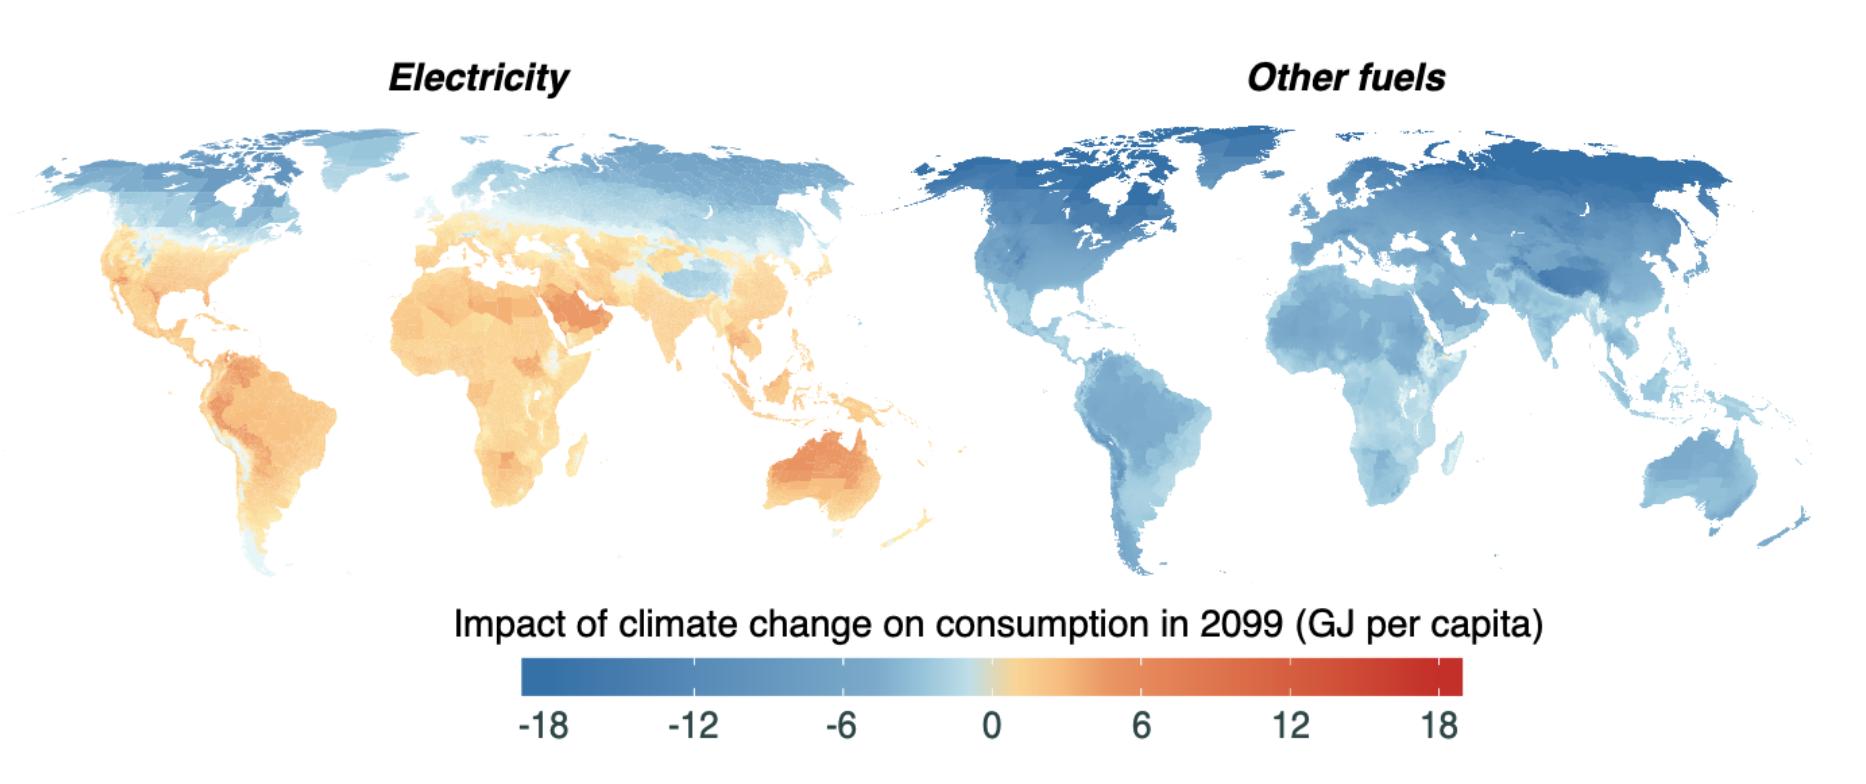 a heat map figure depicting the intensity of climate impacts on energy consumption around the globe